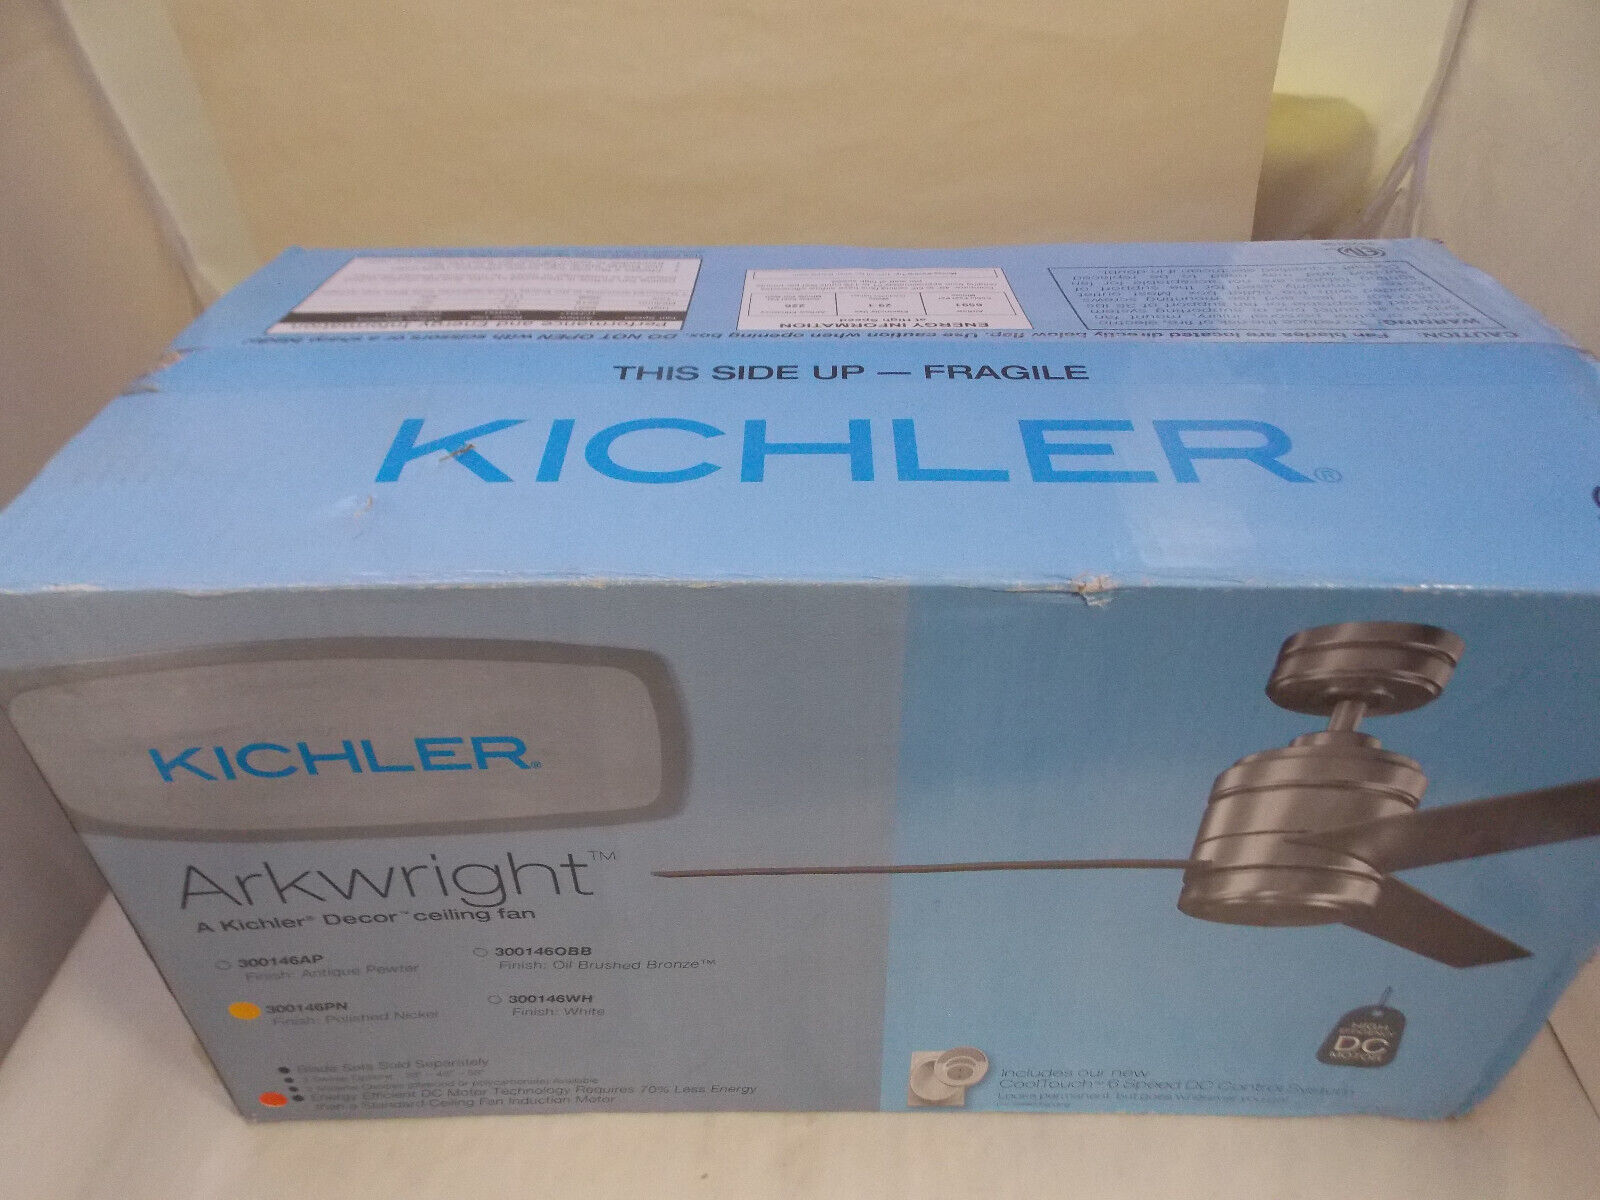 Kichler Ceiling Fan Motor Assembly 300146PN Arkwright Motor Only Polished Nickel - $300.00